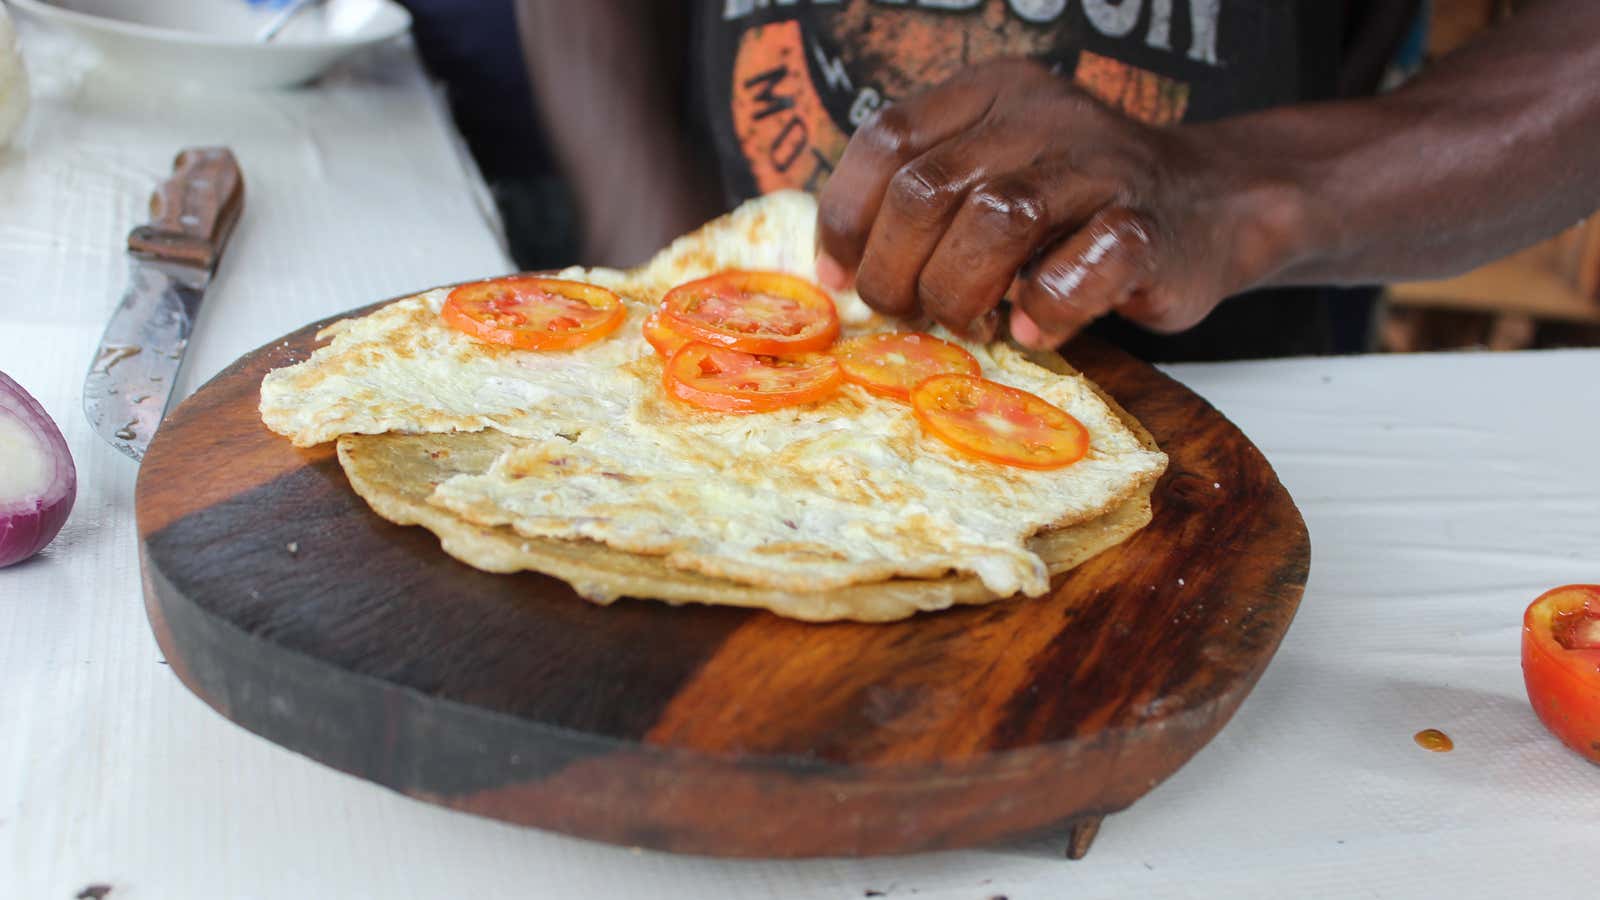 Uganda’s most popular street food is getting smaller as input prices rise